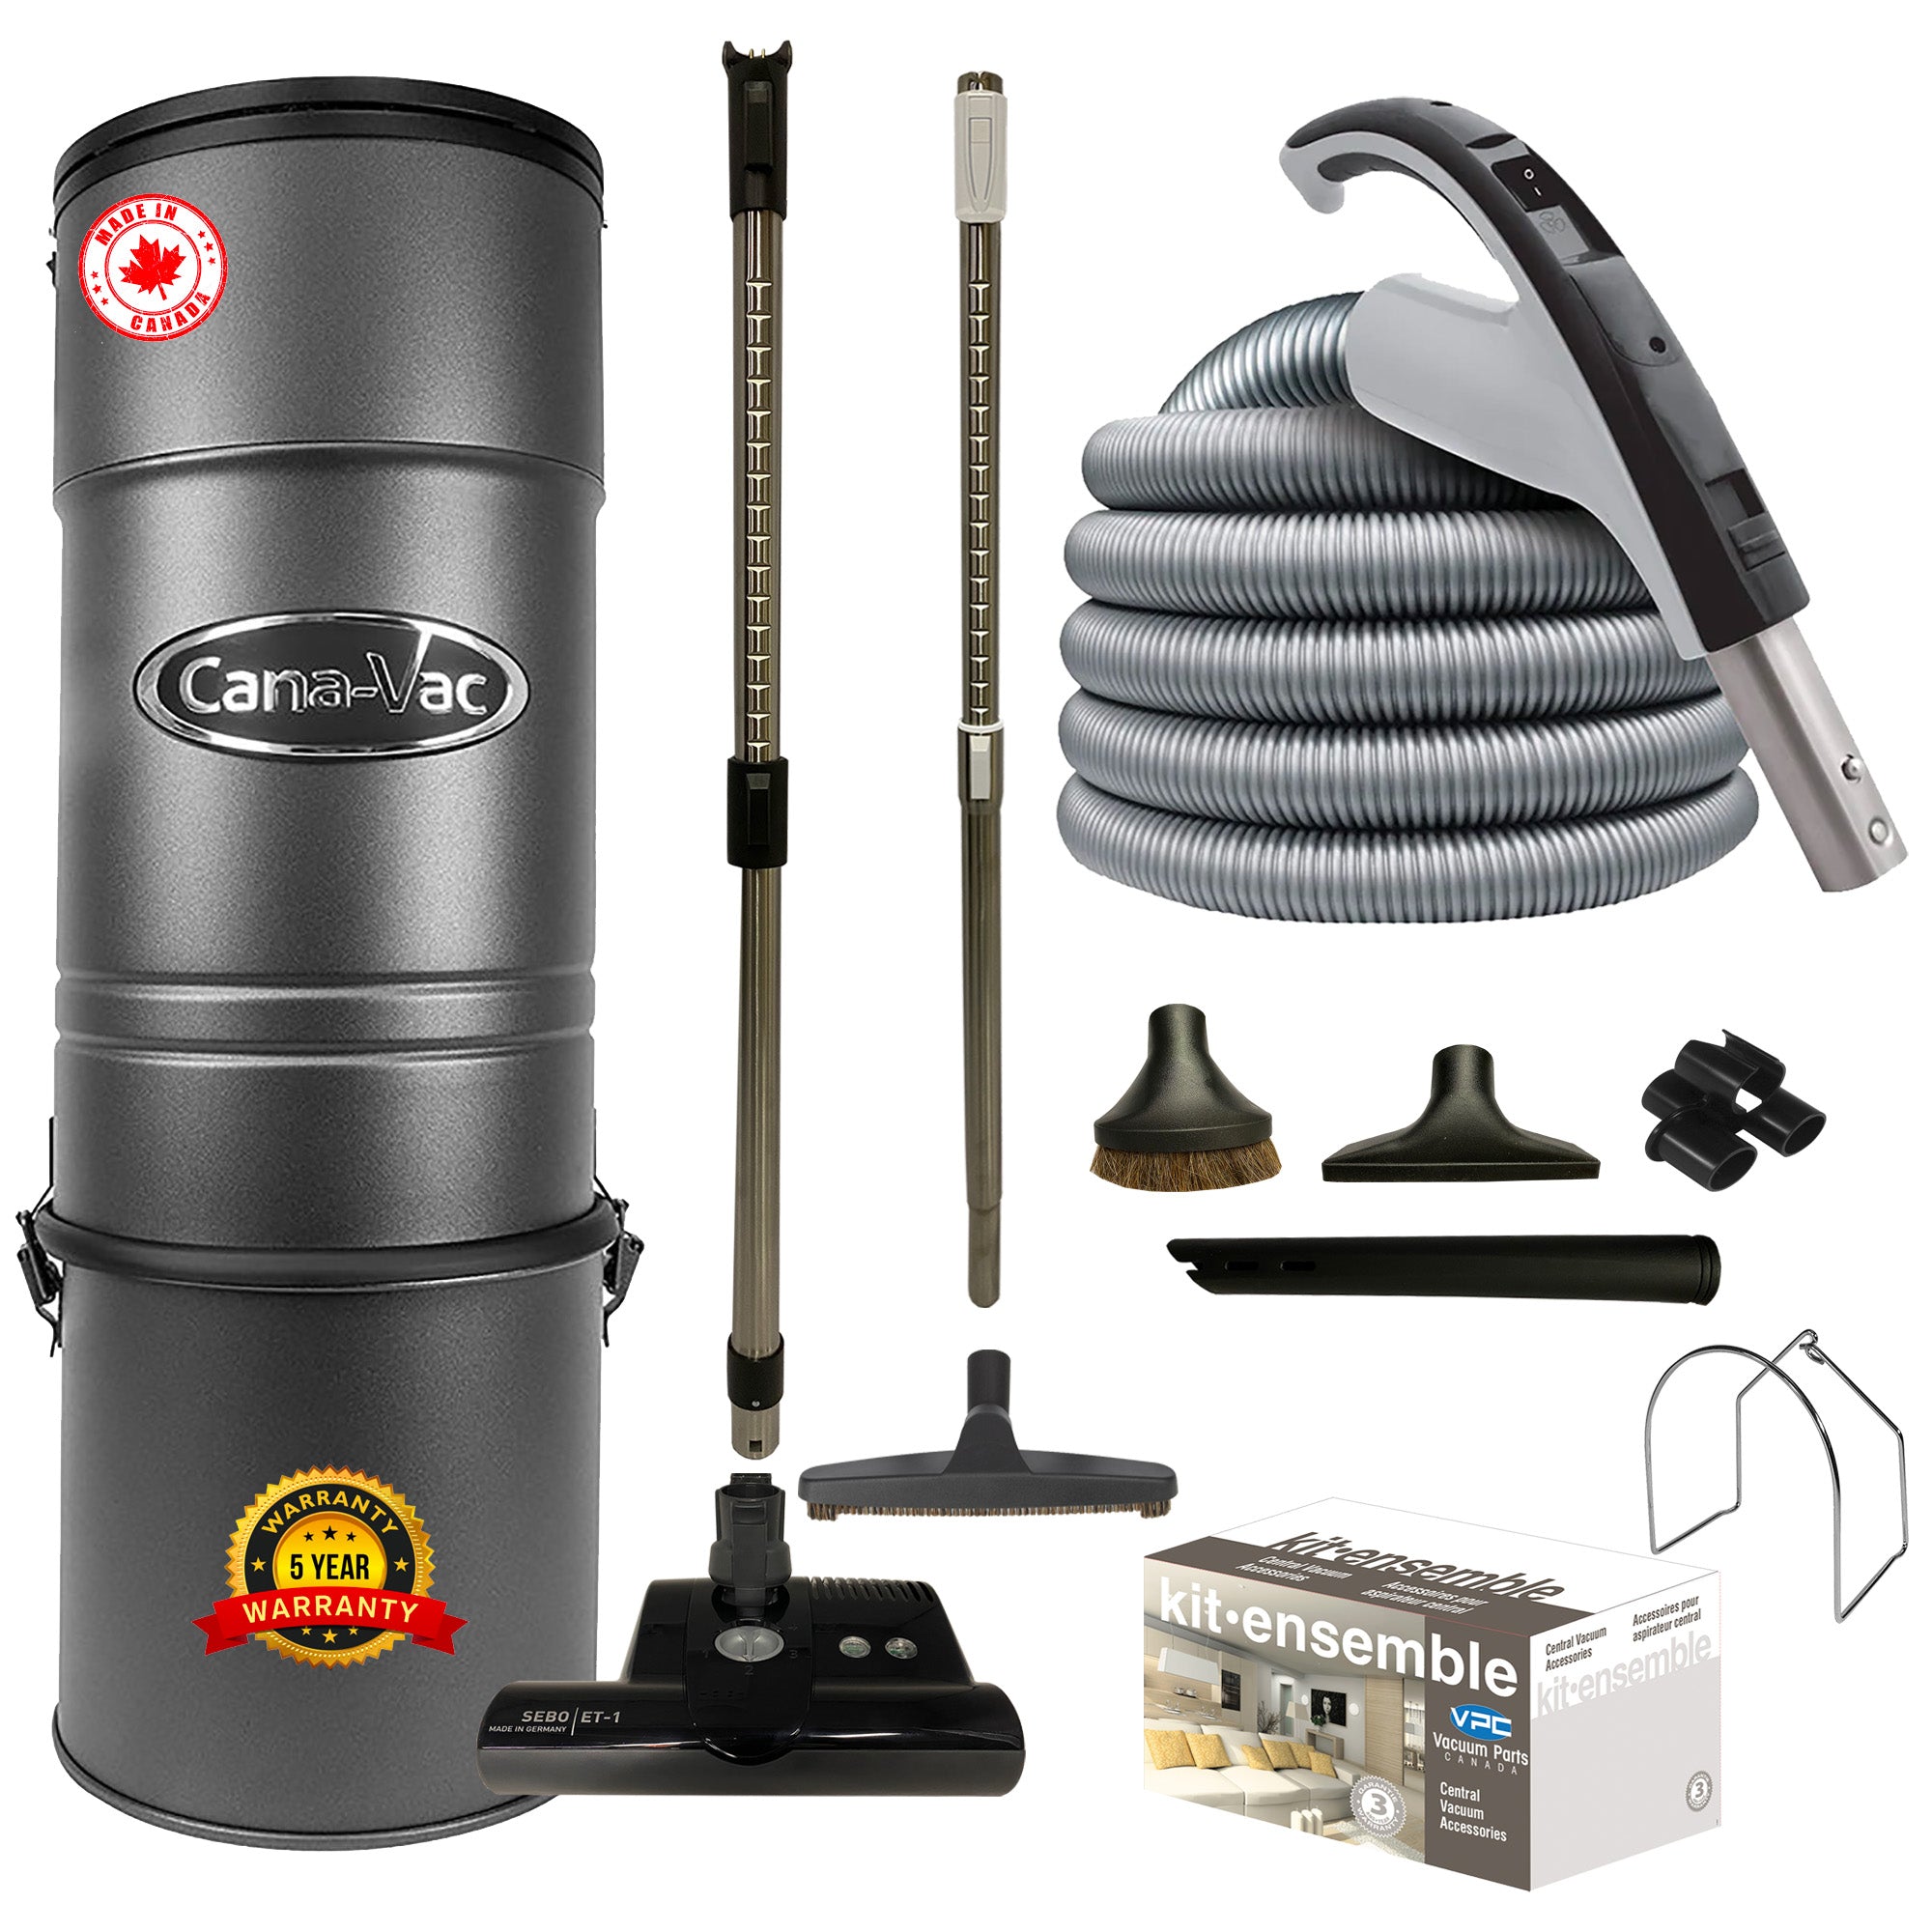 CanaVac CV587 Central Vacuum with Premium Electric Package